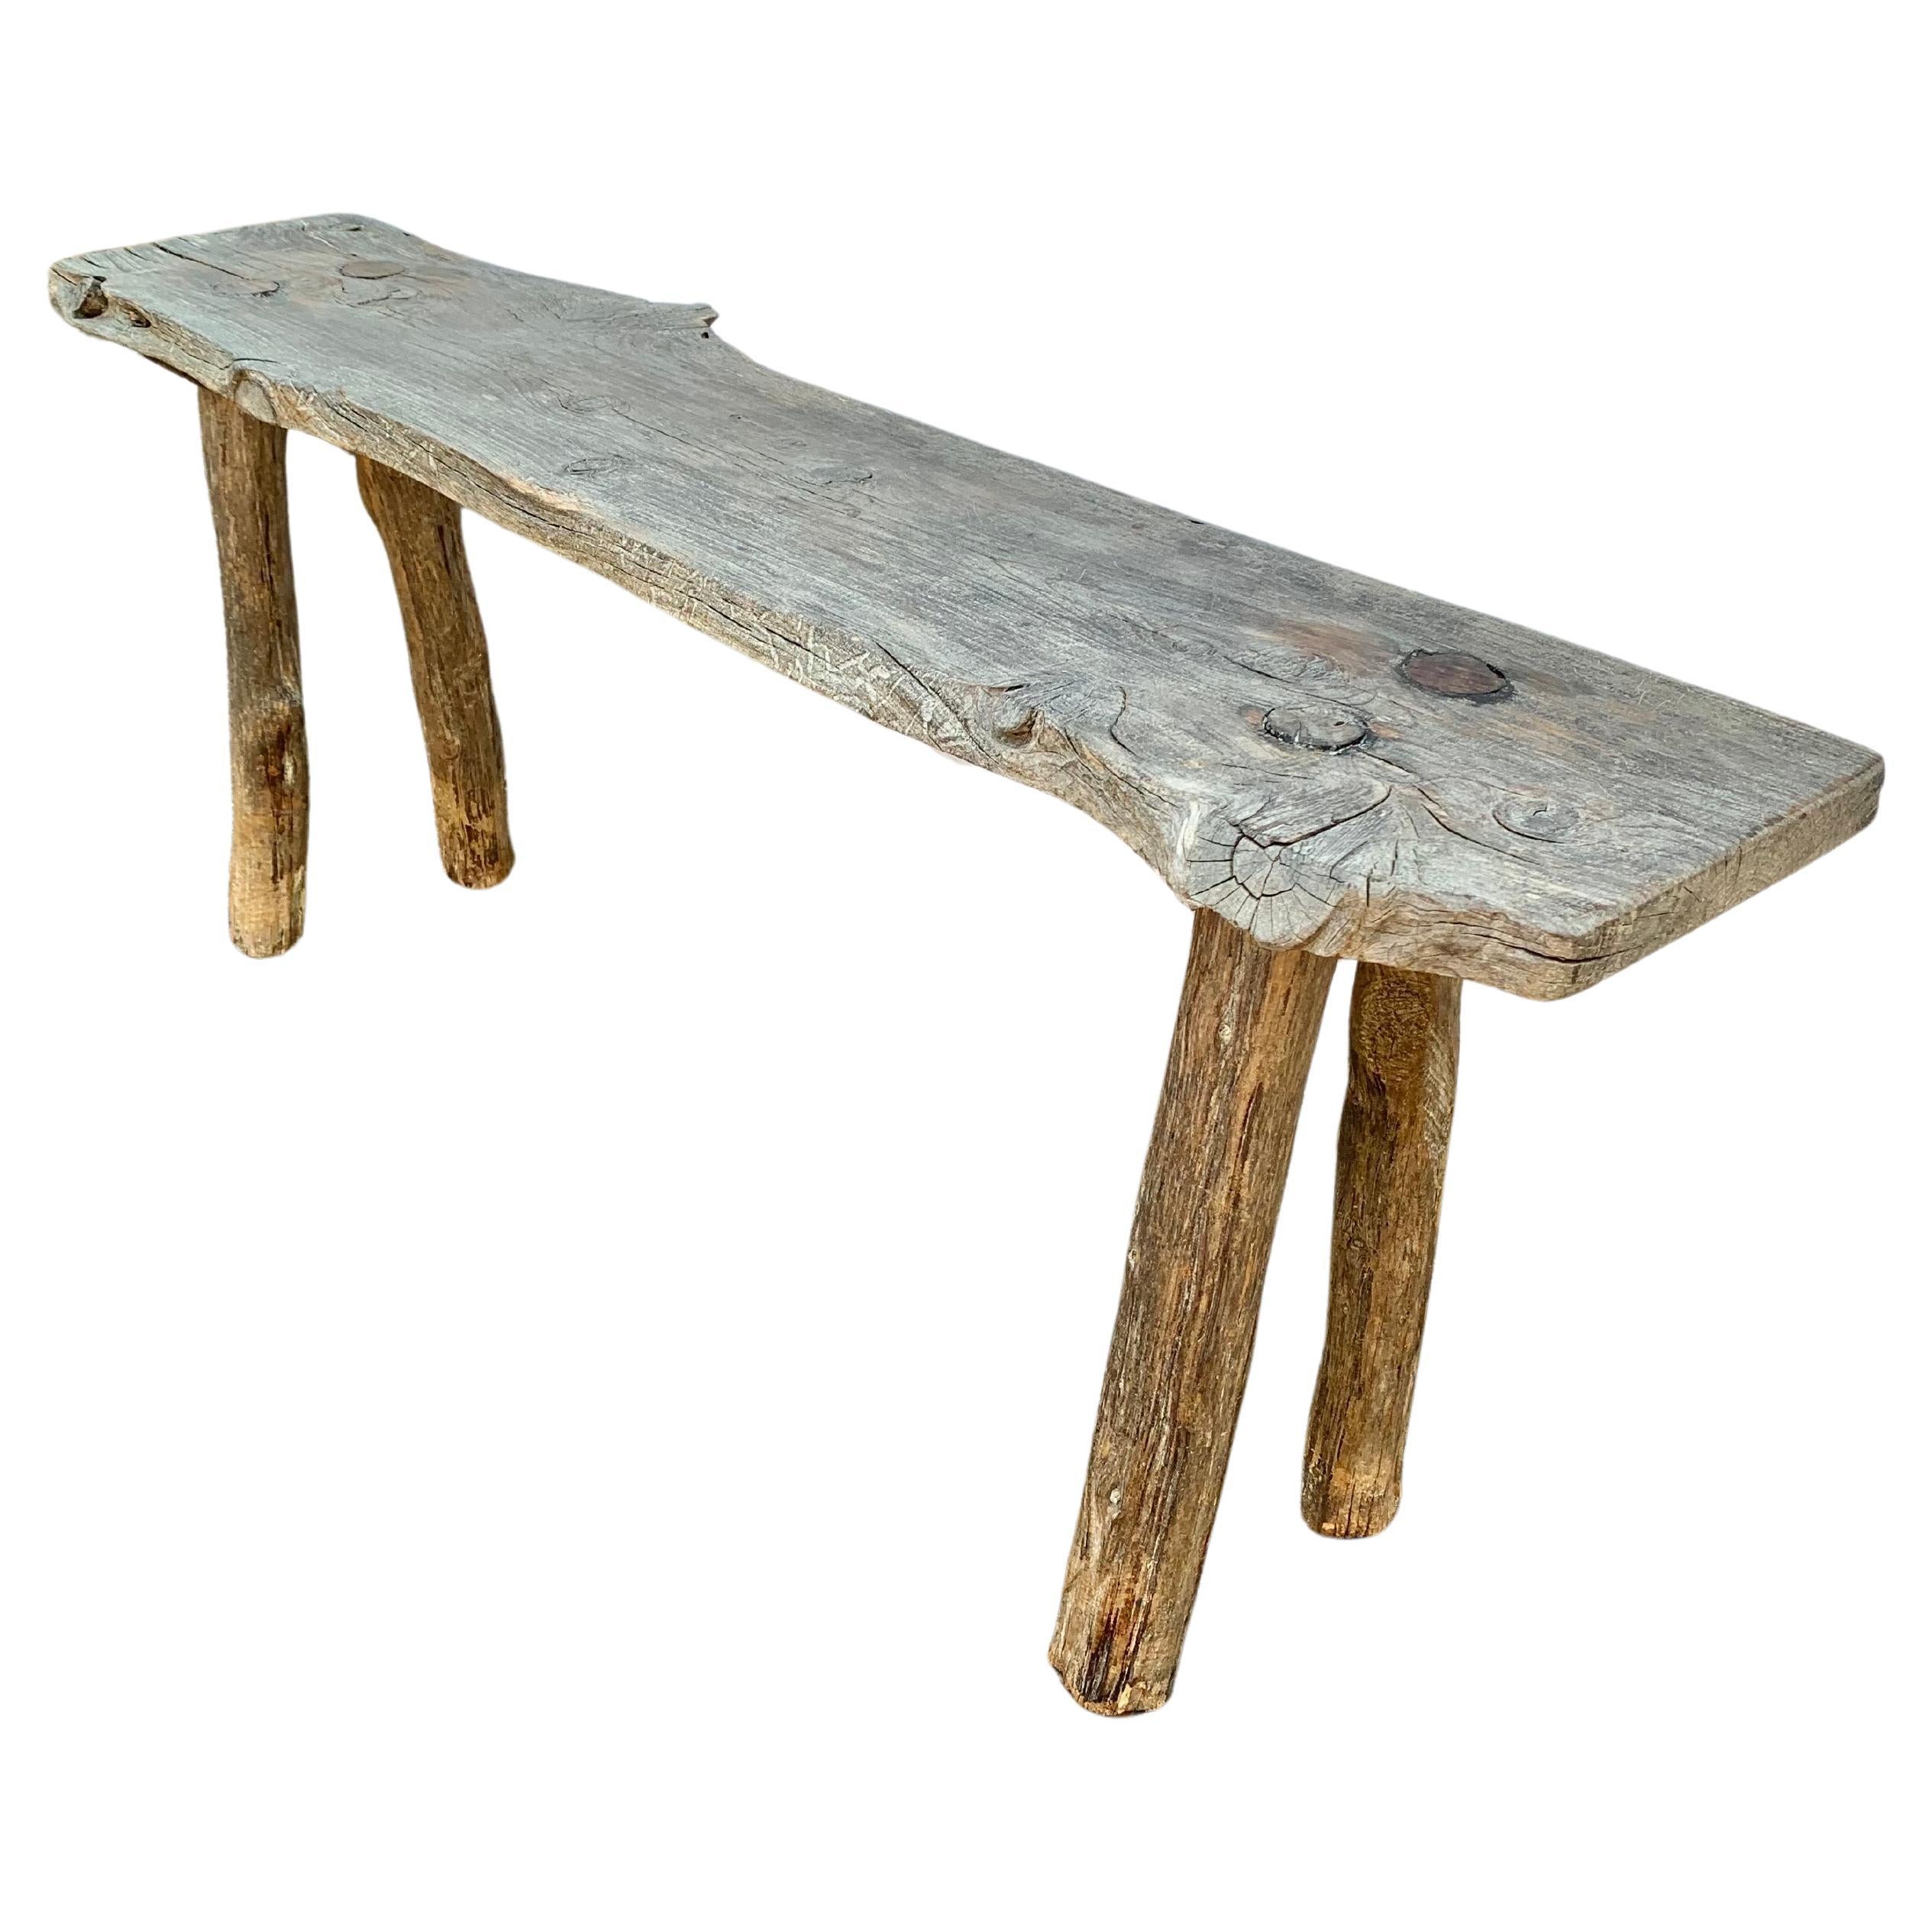 This charming 19th Century French bench was found in the South of France. Sturdily constructed from pine and having a great patina, the bench features four legs pegged into the live edge seat. This simply made sculptural wood bench is perfect for